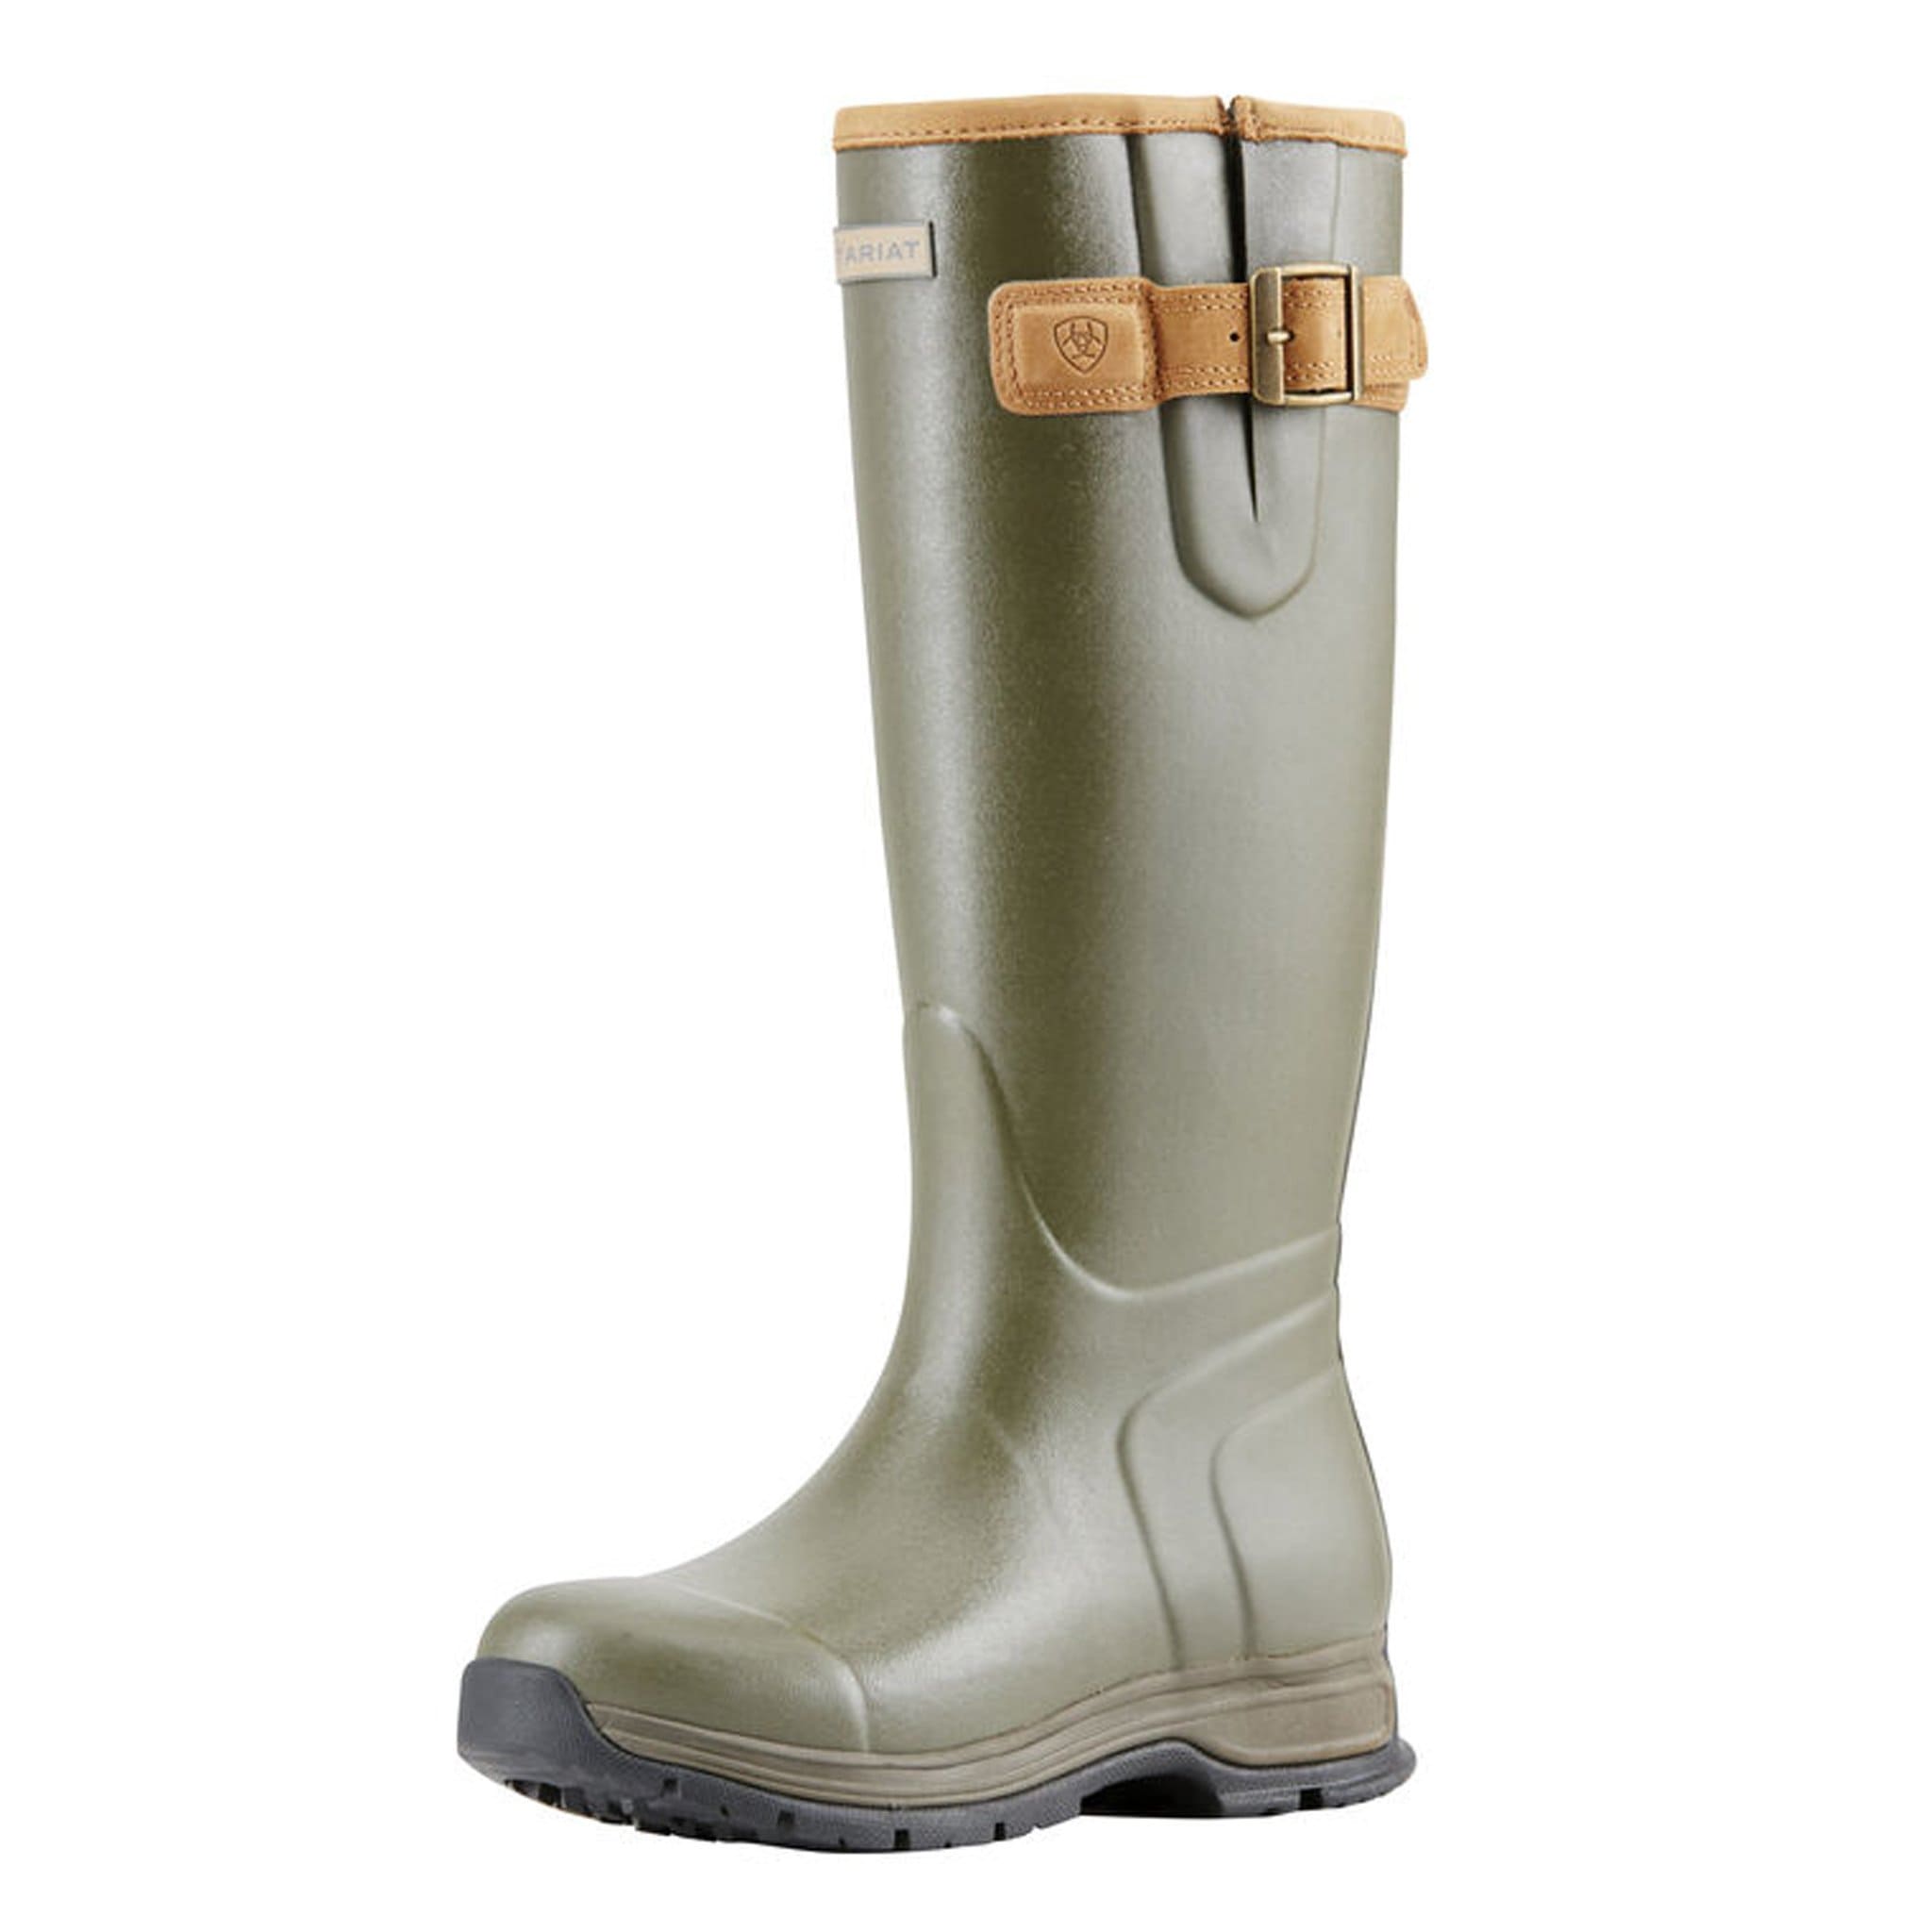 Ariat Burford Rubber Wellington Boots 10018771 Olive Green Front View